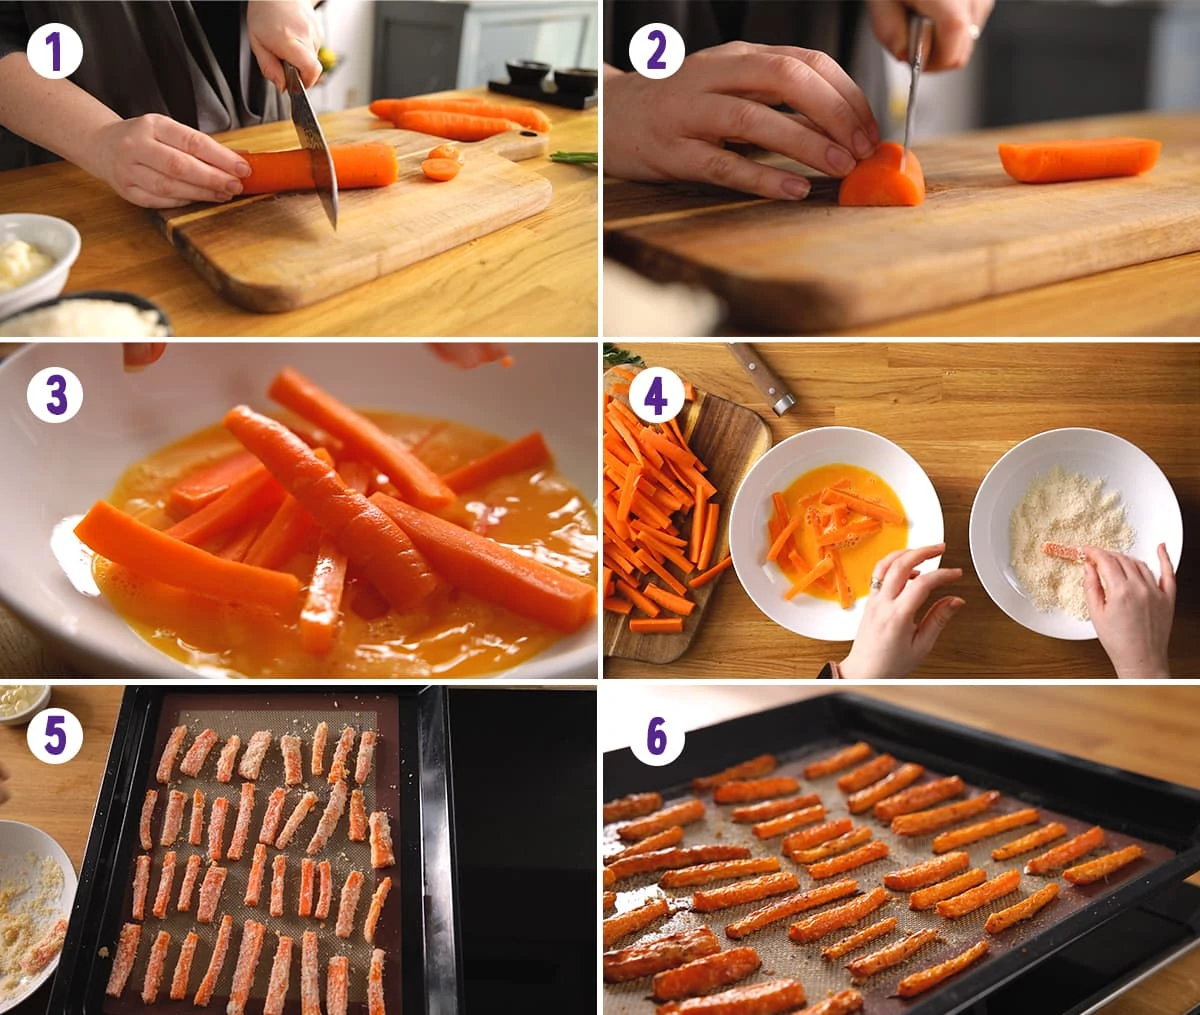 6 image collage showing how to make carrot fries